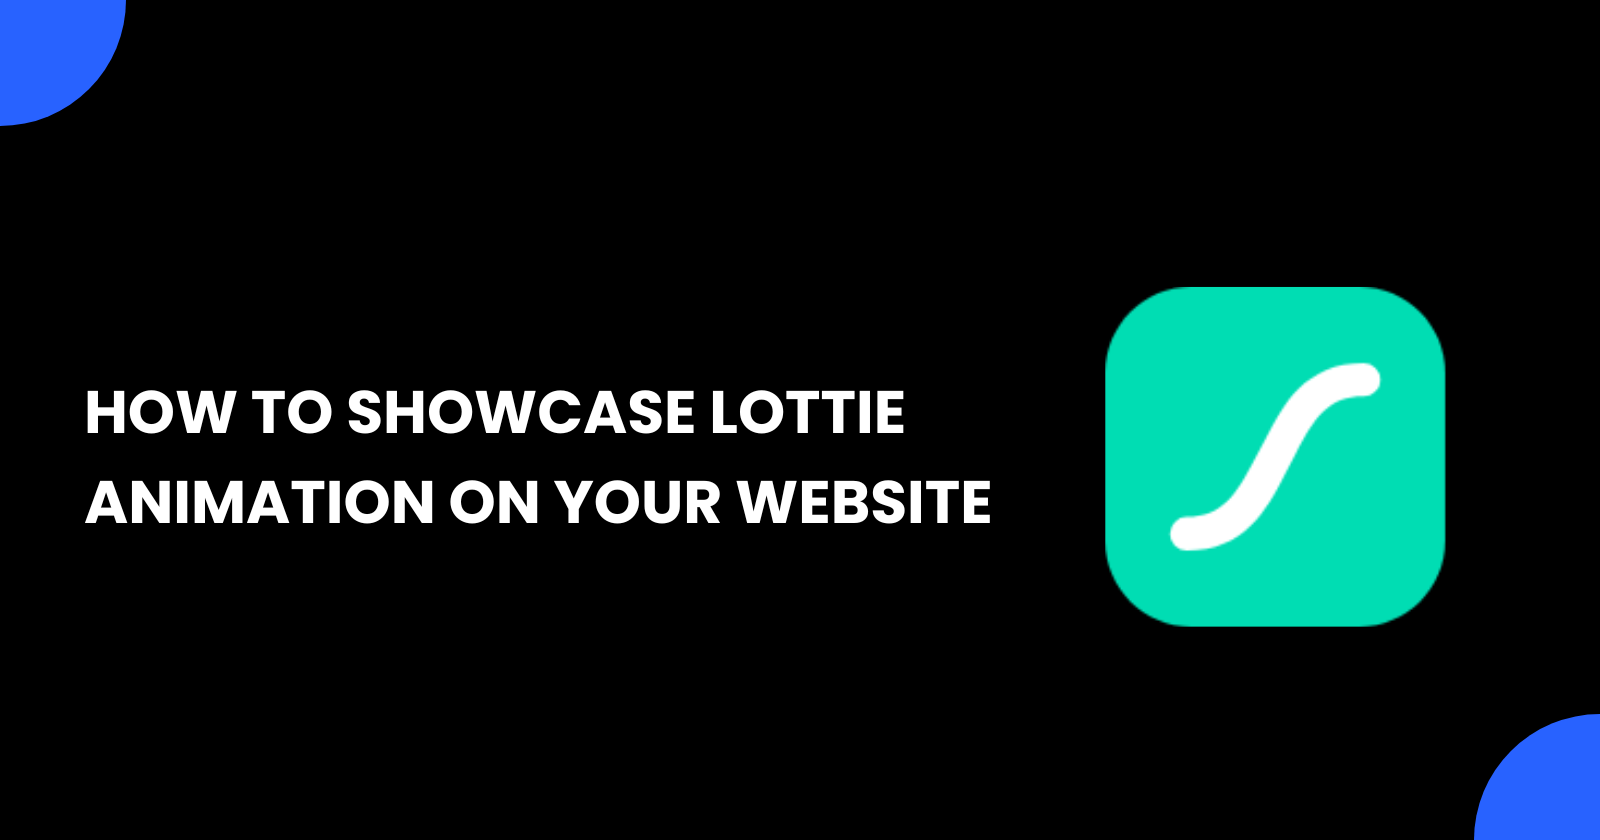 How to Showcase Lottie Animation on Your Website